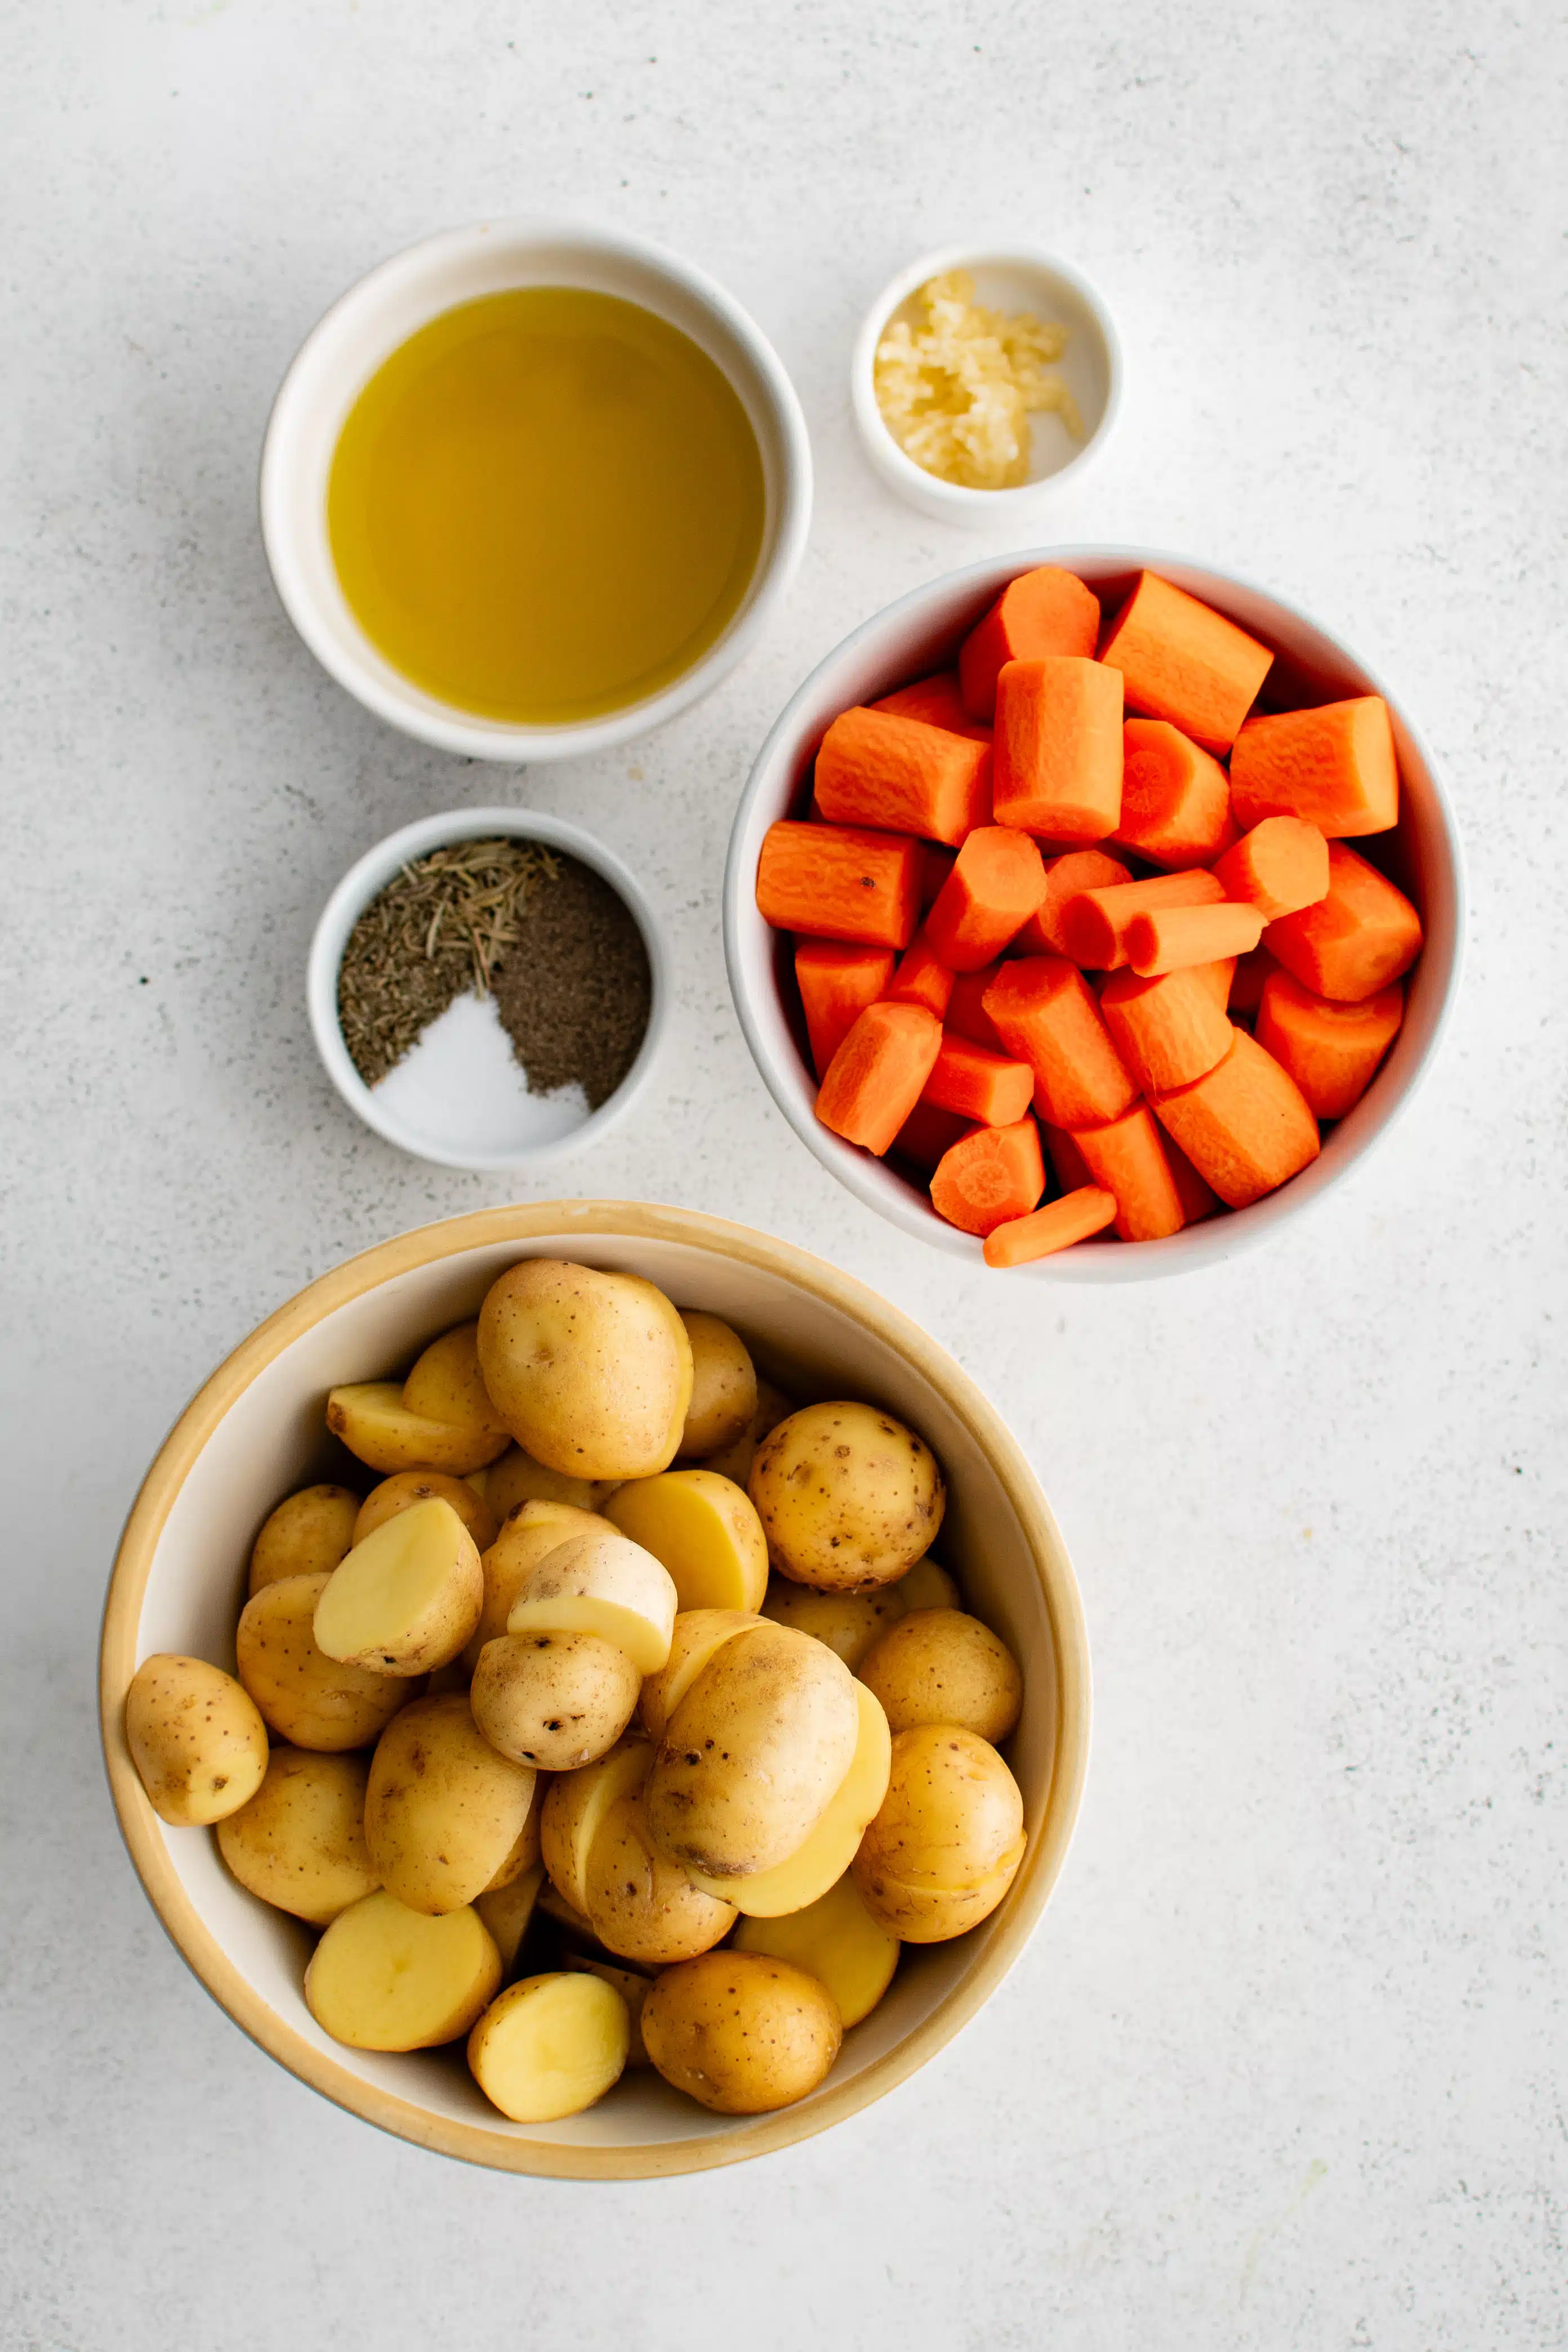 Ingredients needed to make roasted potatoes and carrots in individual measuring cups and ramekins.